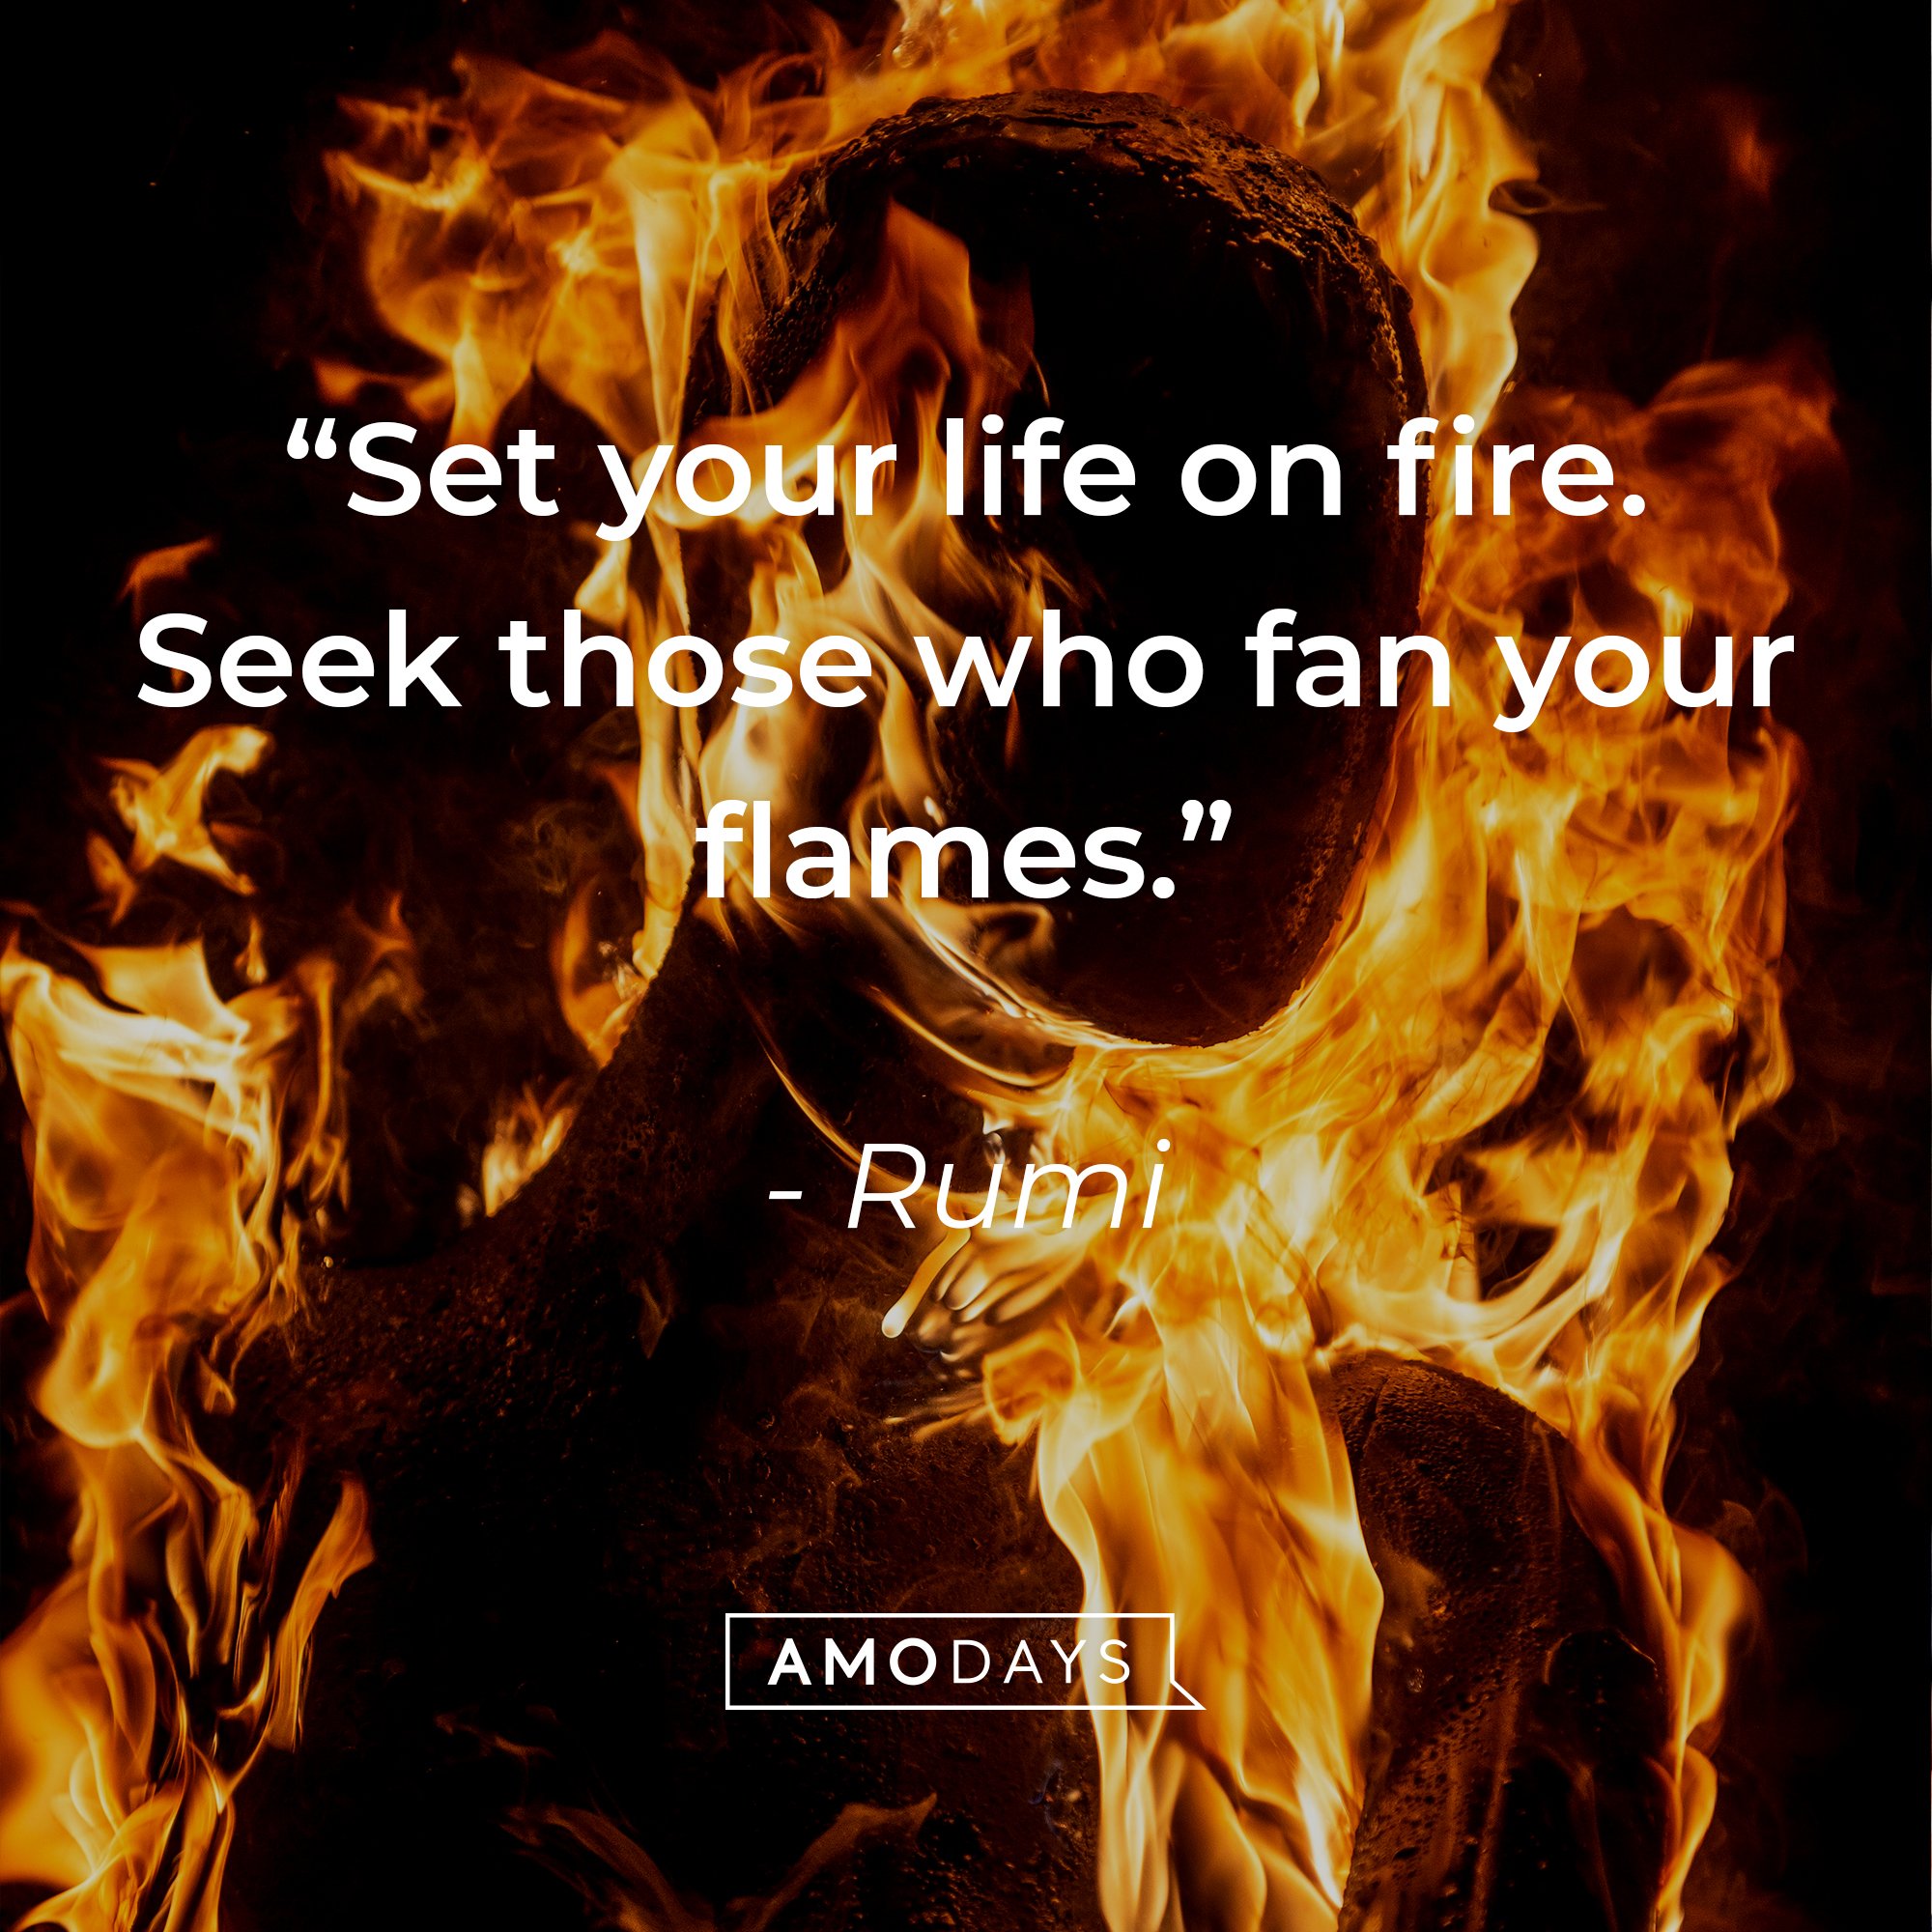 Rumi’s quote: “Set your life on fire. Seek those who fan your flames.” | Image: Amodays  